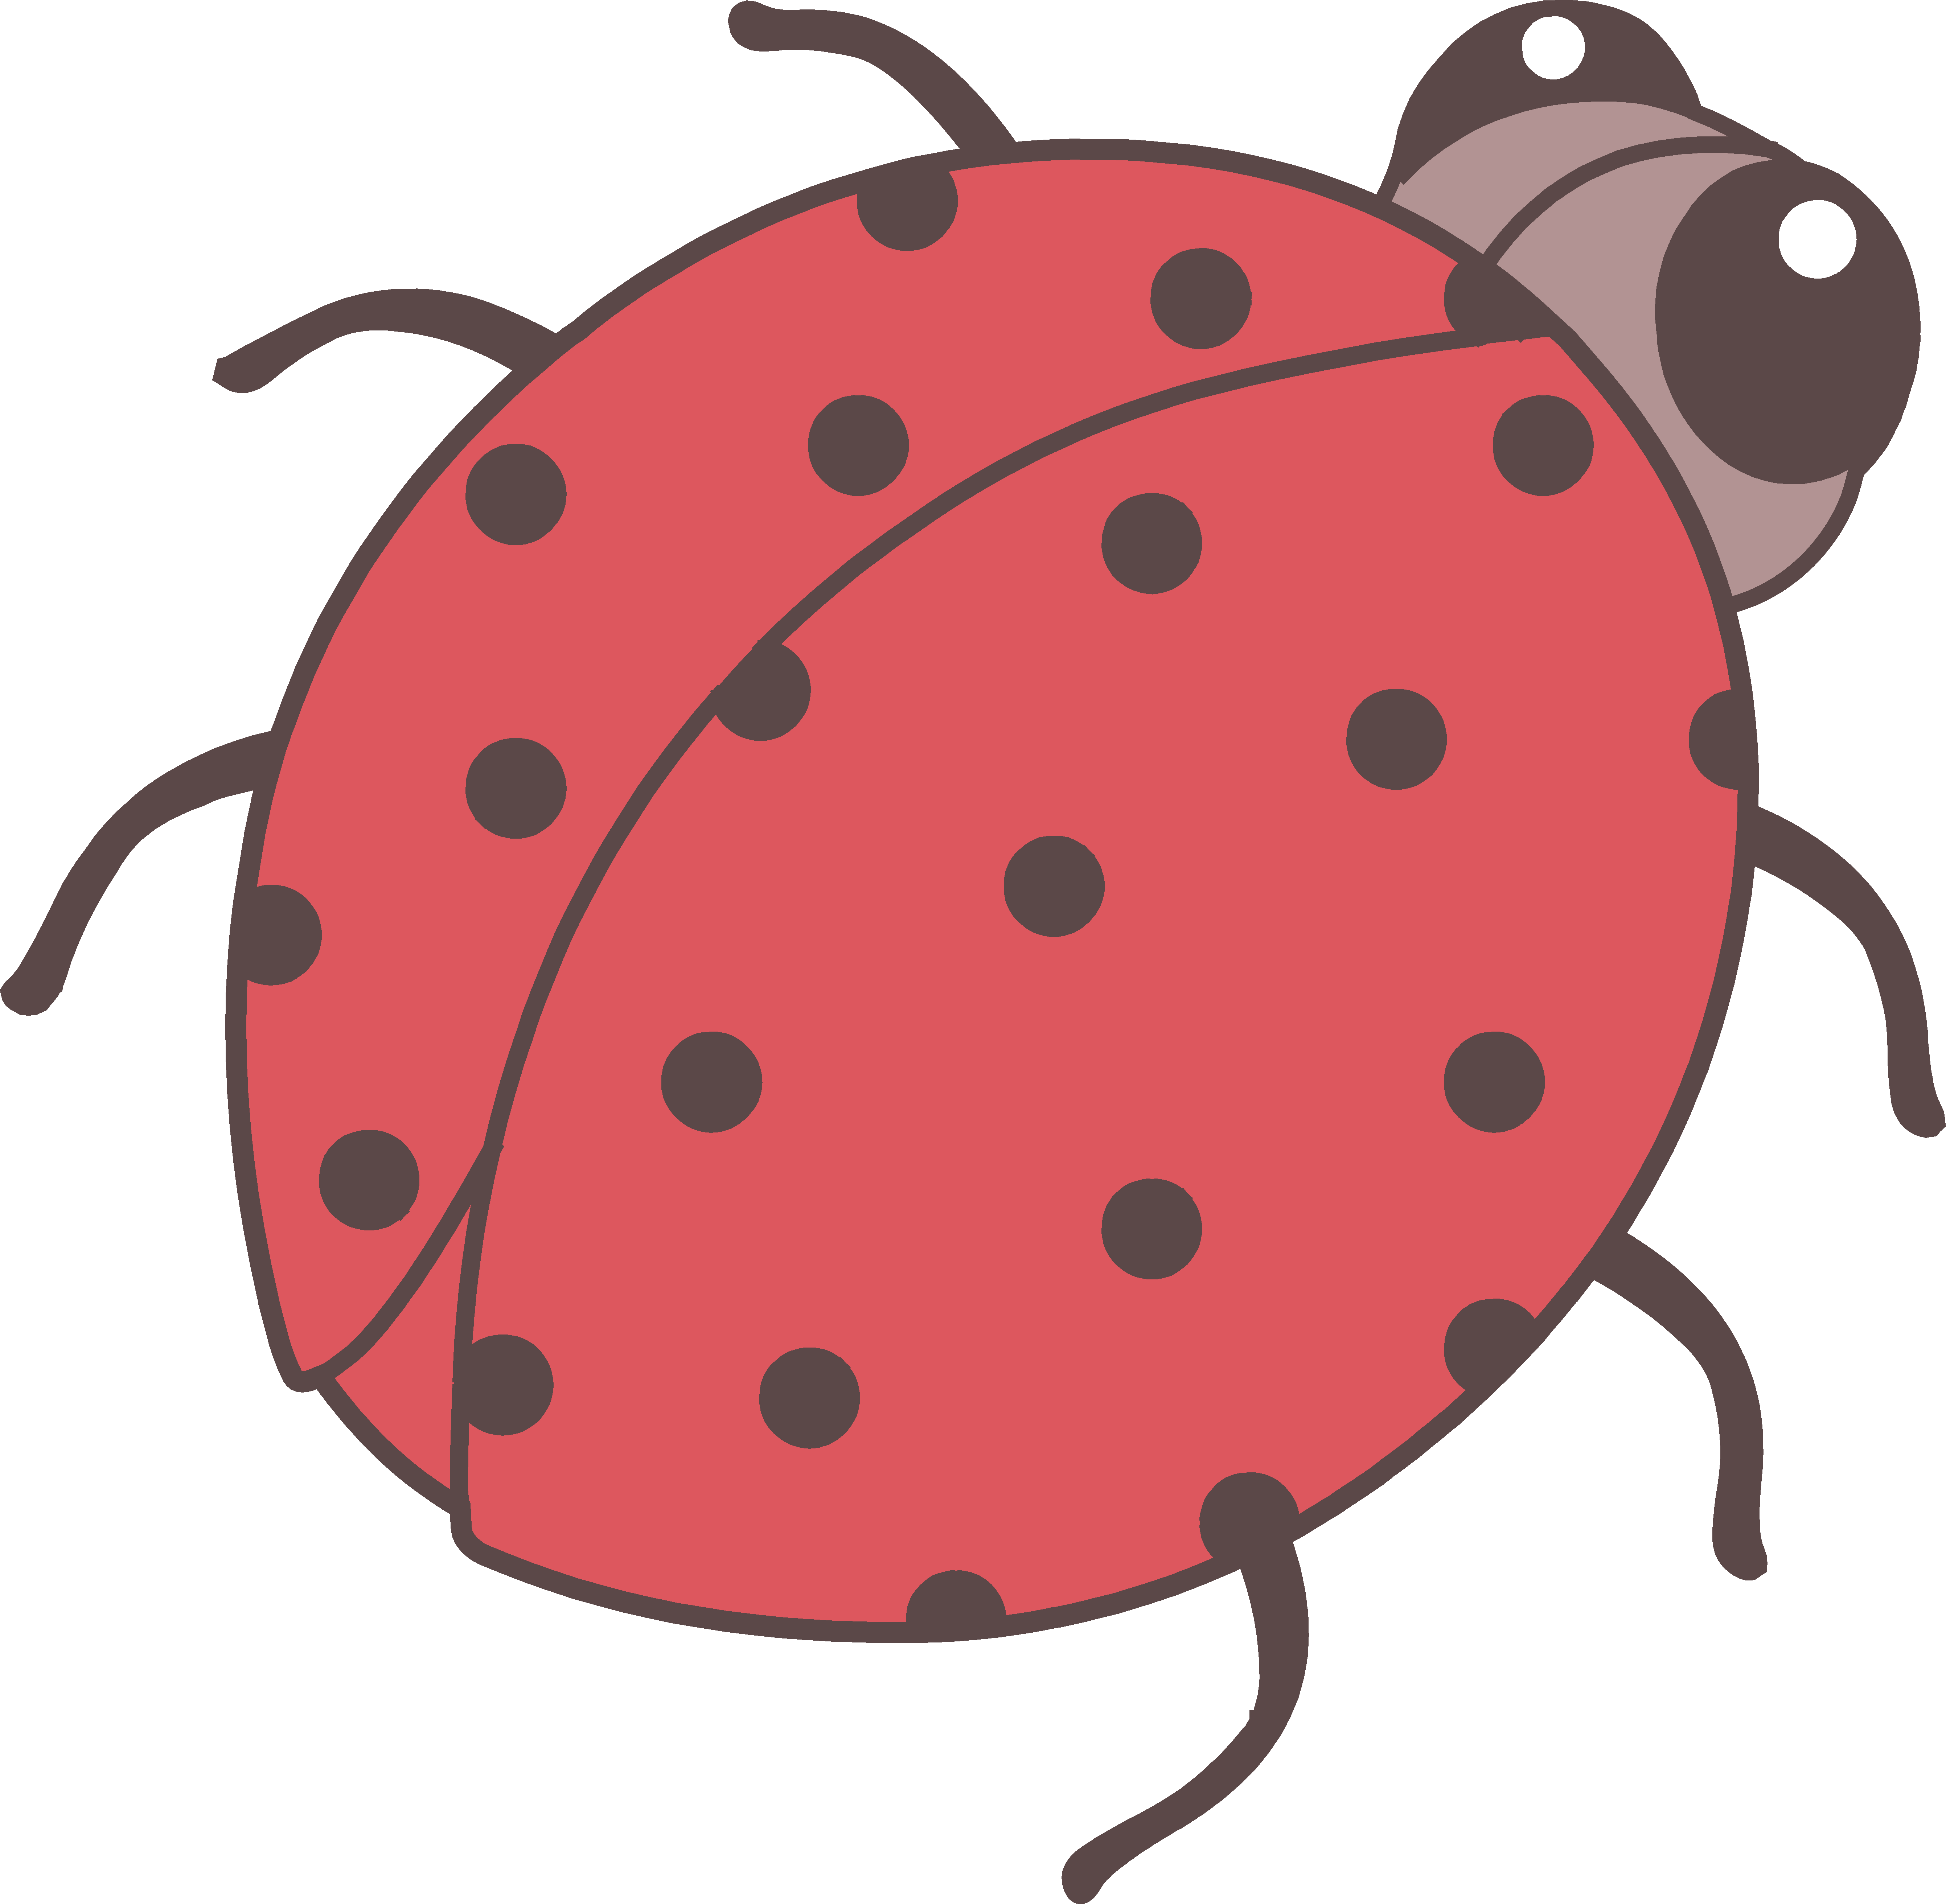 Lady Bug Drawing | Clipart Panda - Free Clipart Images